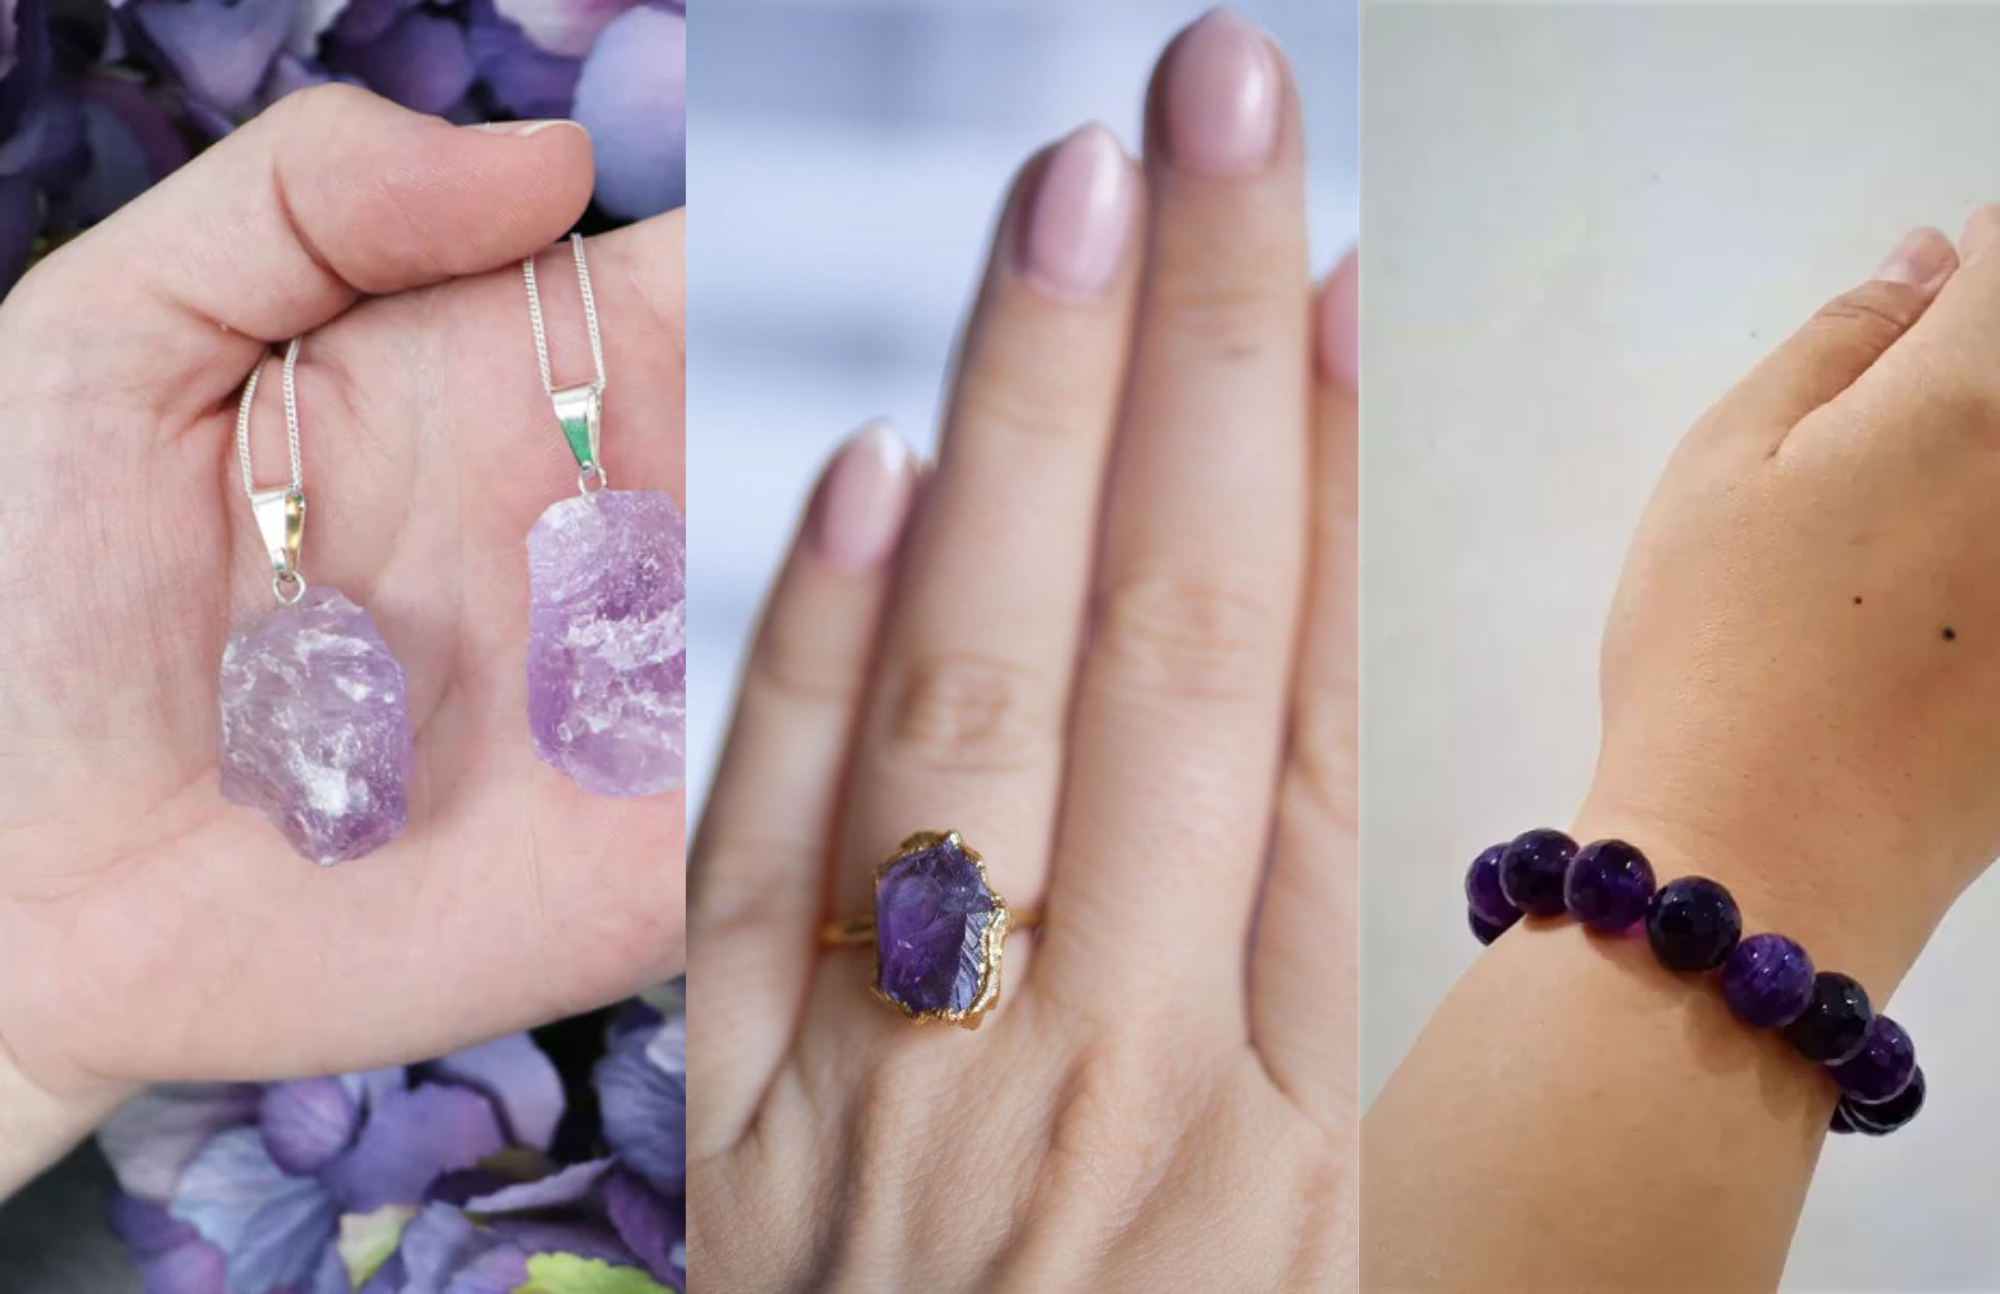 The three different types of jewelries made of amethyst